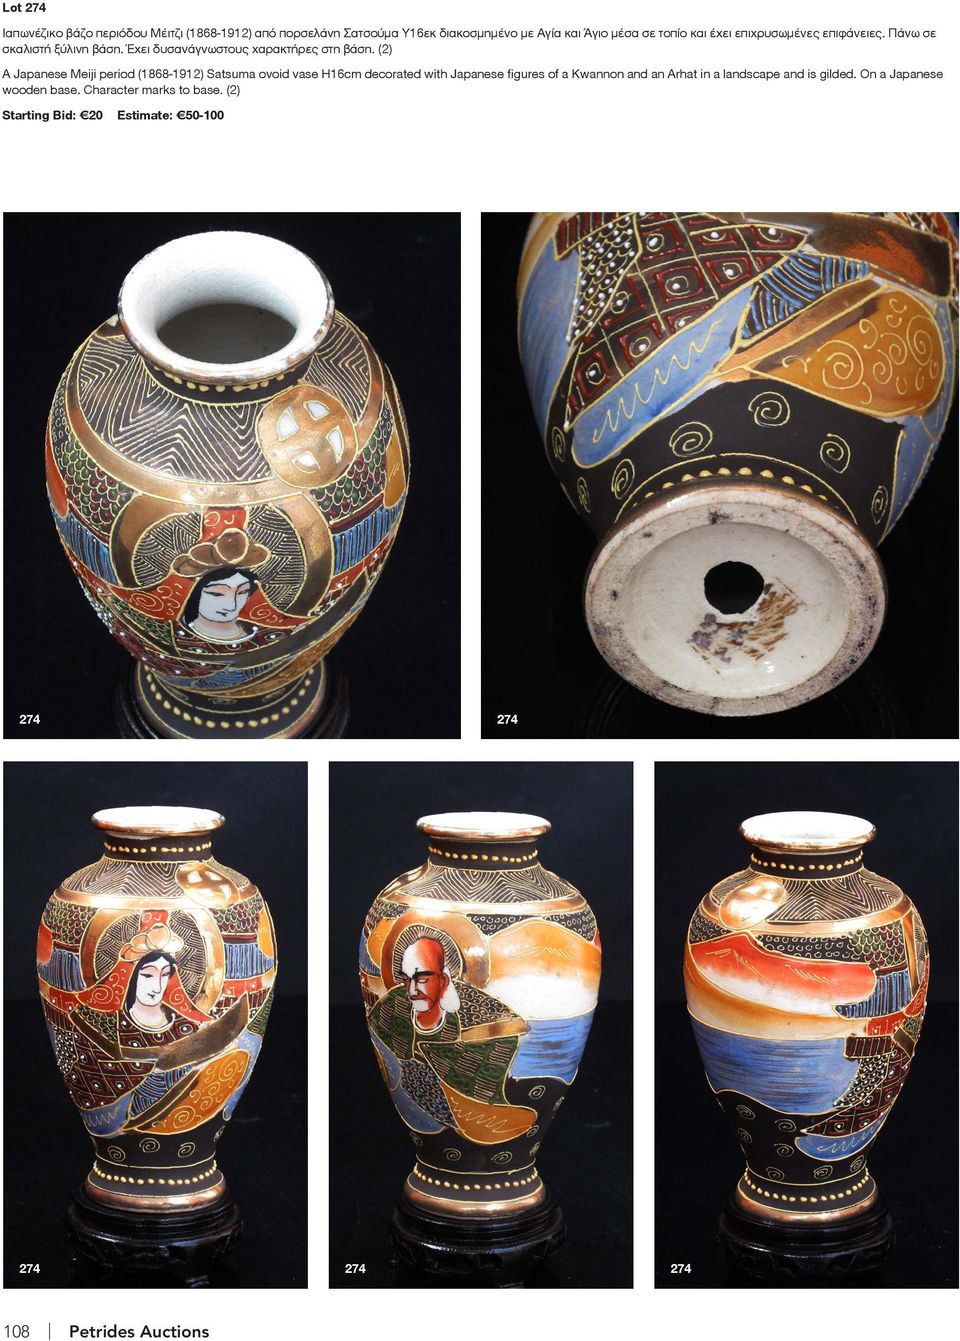 (2) A Japanese Meiji period (1868-1912) Satsuma ovoid vase H16cm decorated with Japanese figures of a Kwannon and an Arhat in a